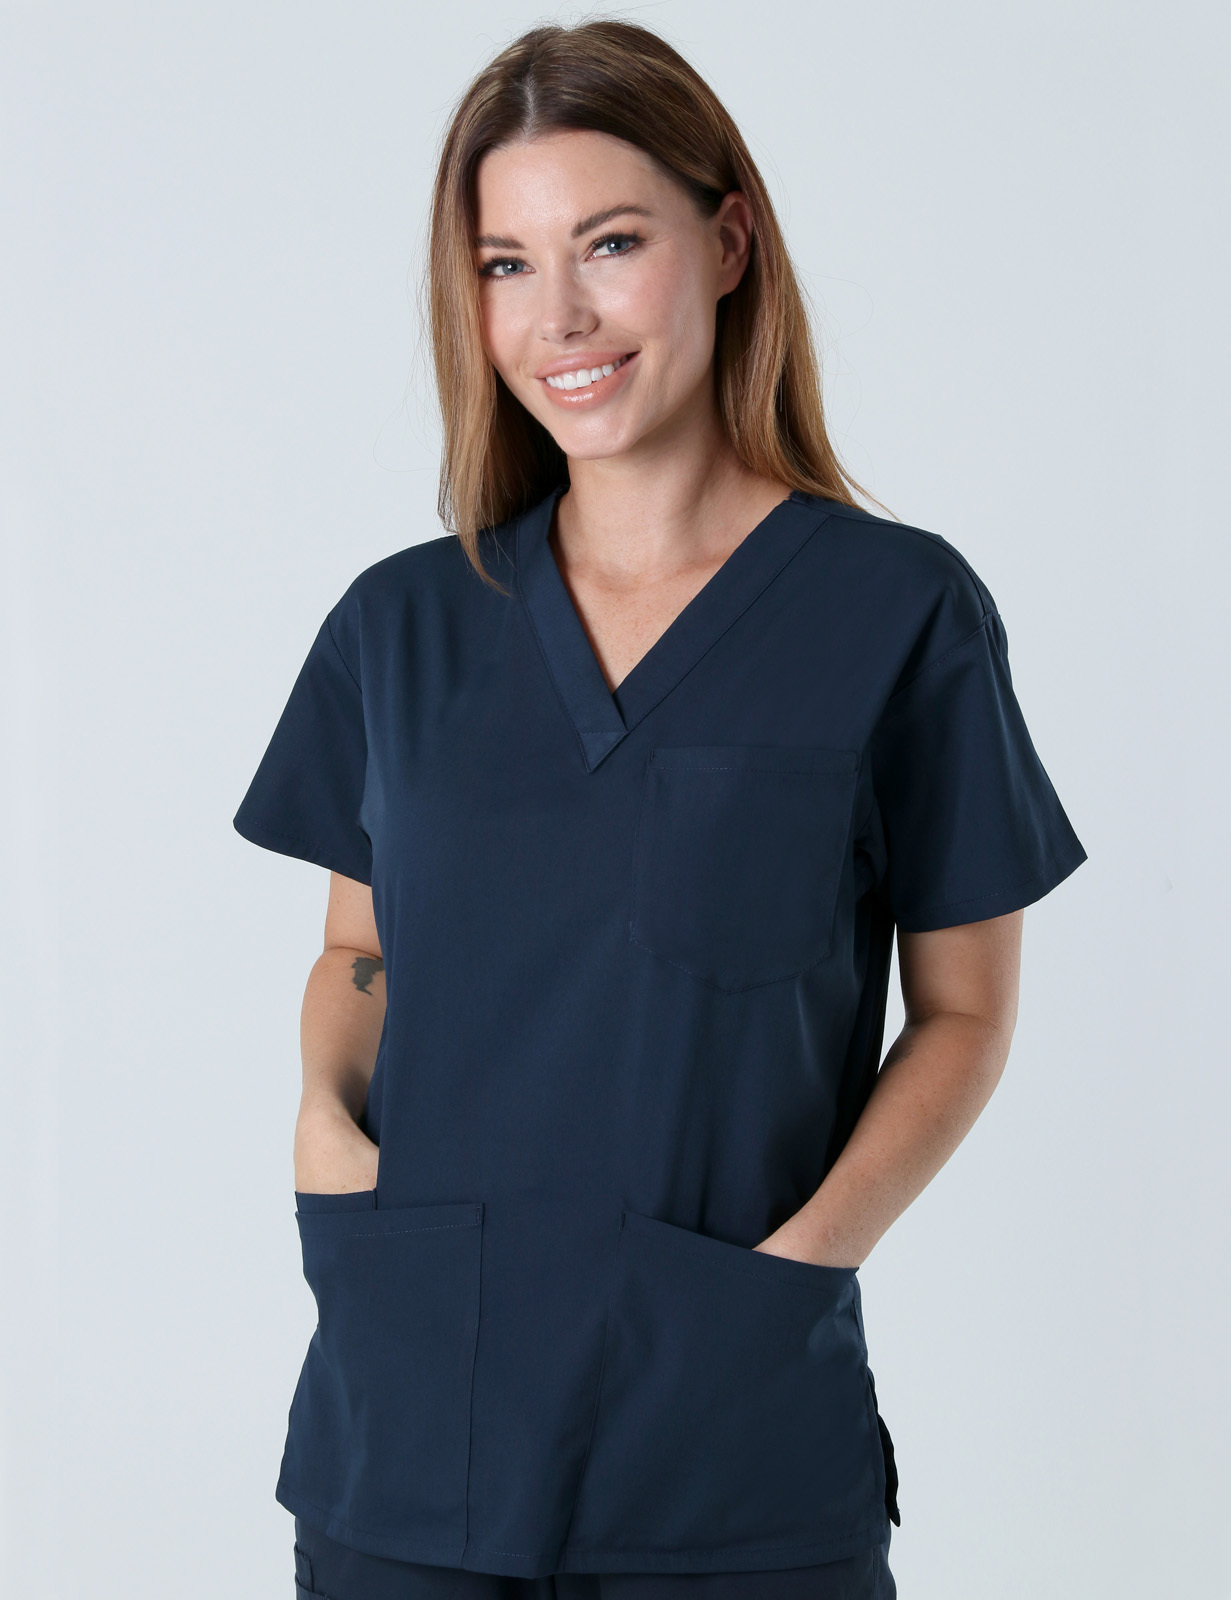 Ipswich Hospital - ED/ER (4 Pocket Scrub Top and Cargo Pants in Navy incl Logos)